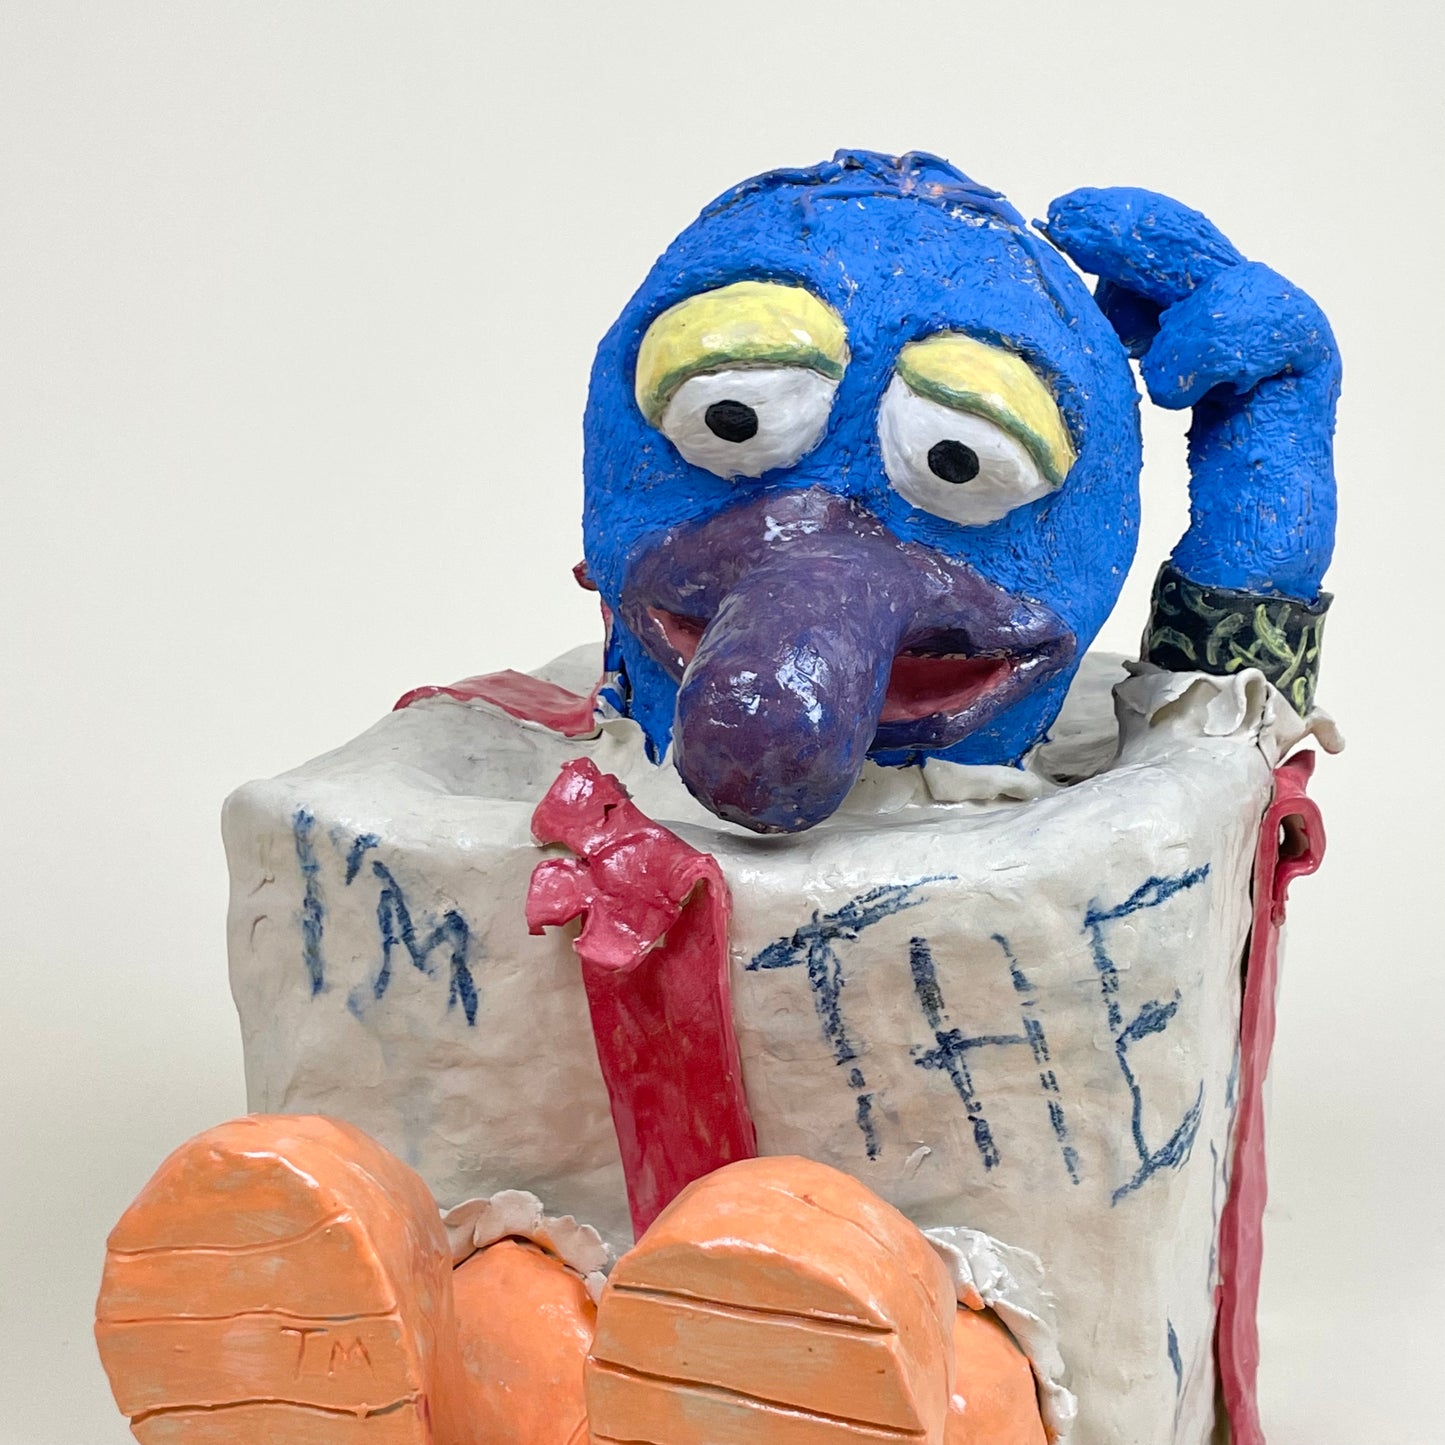 "Gonzo" by Snakeboot